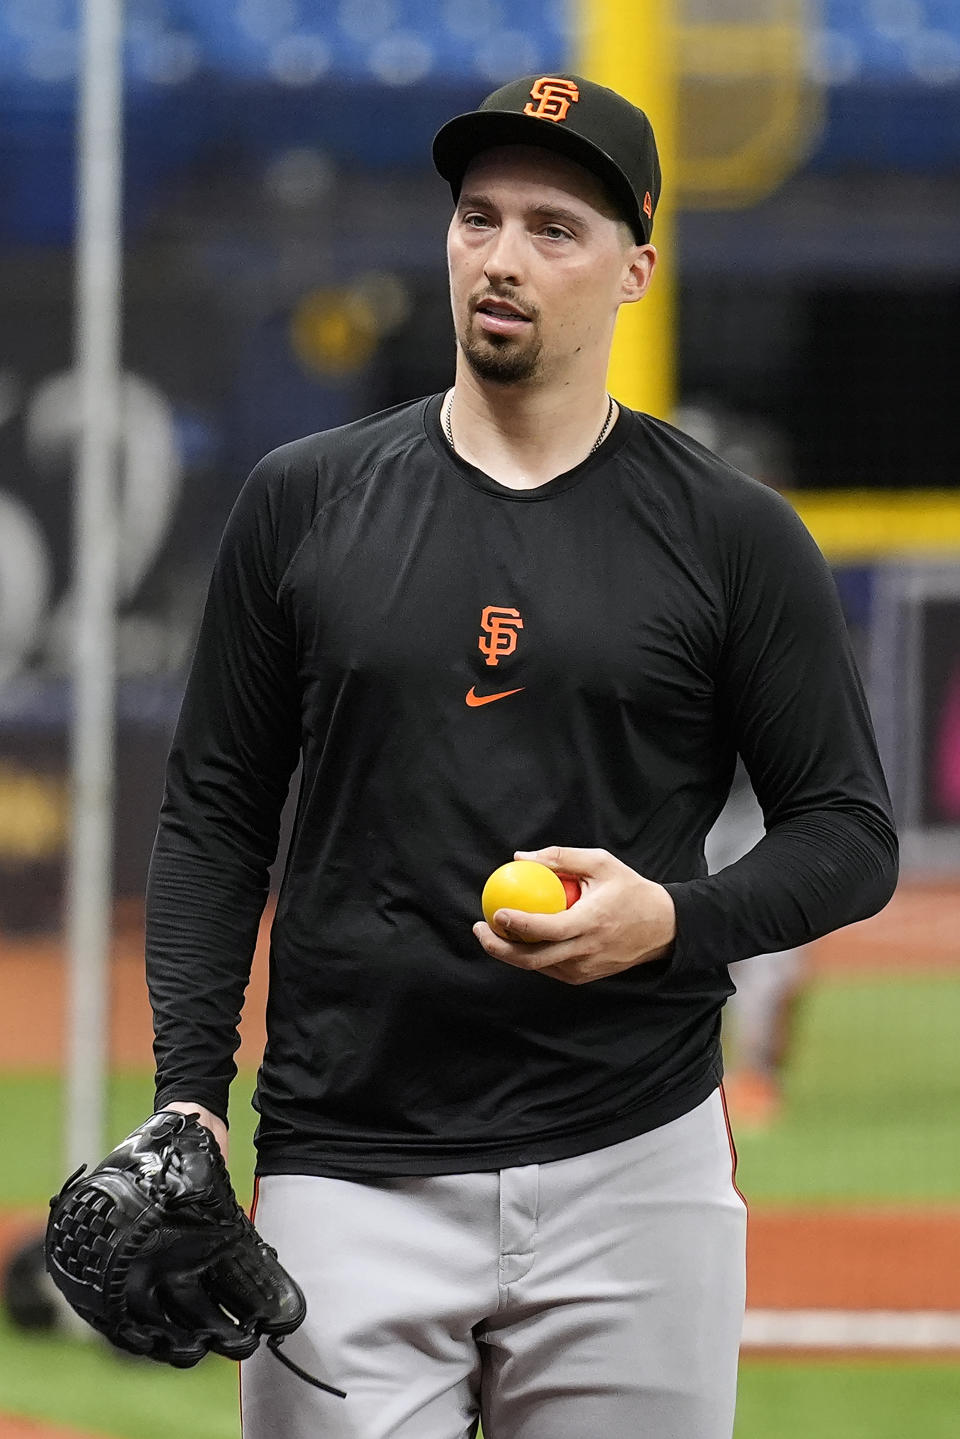 San Francisco Giants pitcher Blake Snell walks across the field before a baseball game against the Tampa Bay Rays, Friday, April 12, 2024, in St. Petersburg, Fla. Snell, a former pitcher for the Rays, is making his first trip to Tropicana Field since leaving the team. (AP Photo/Chris O'Meara)